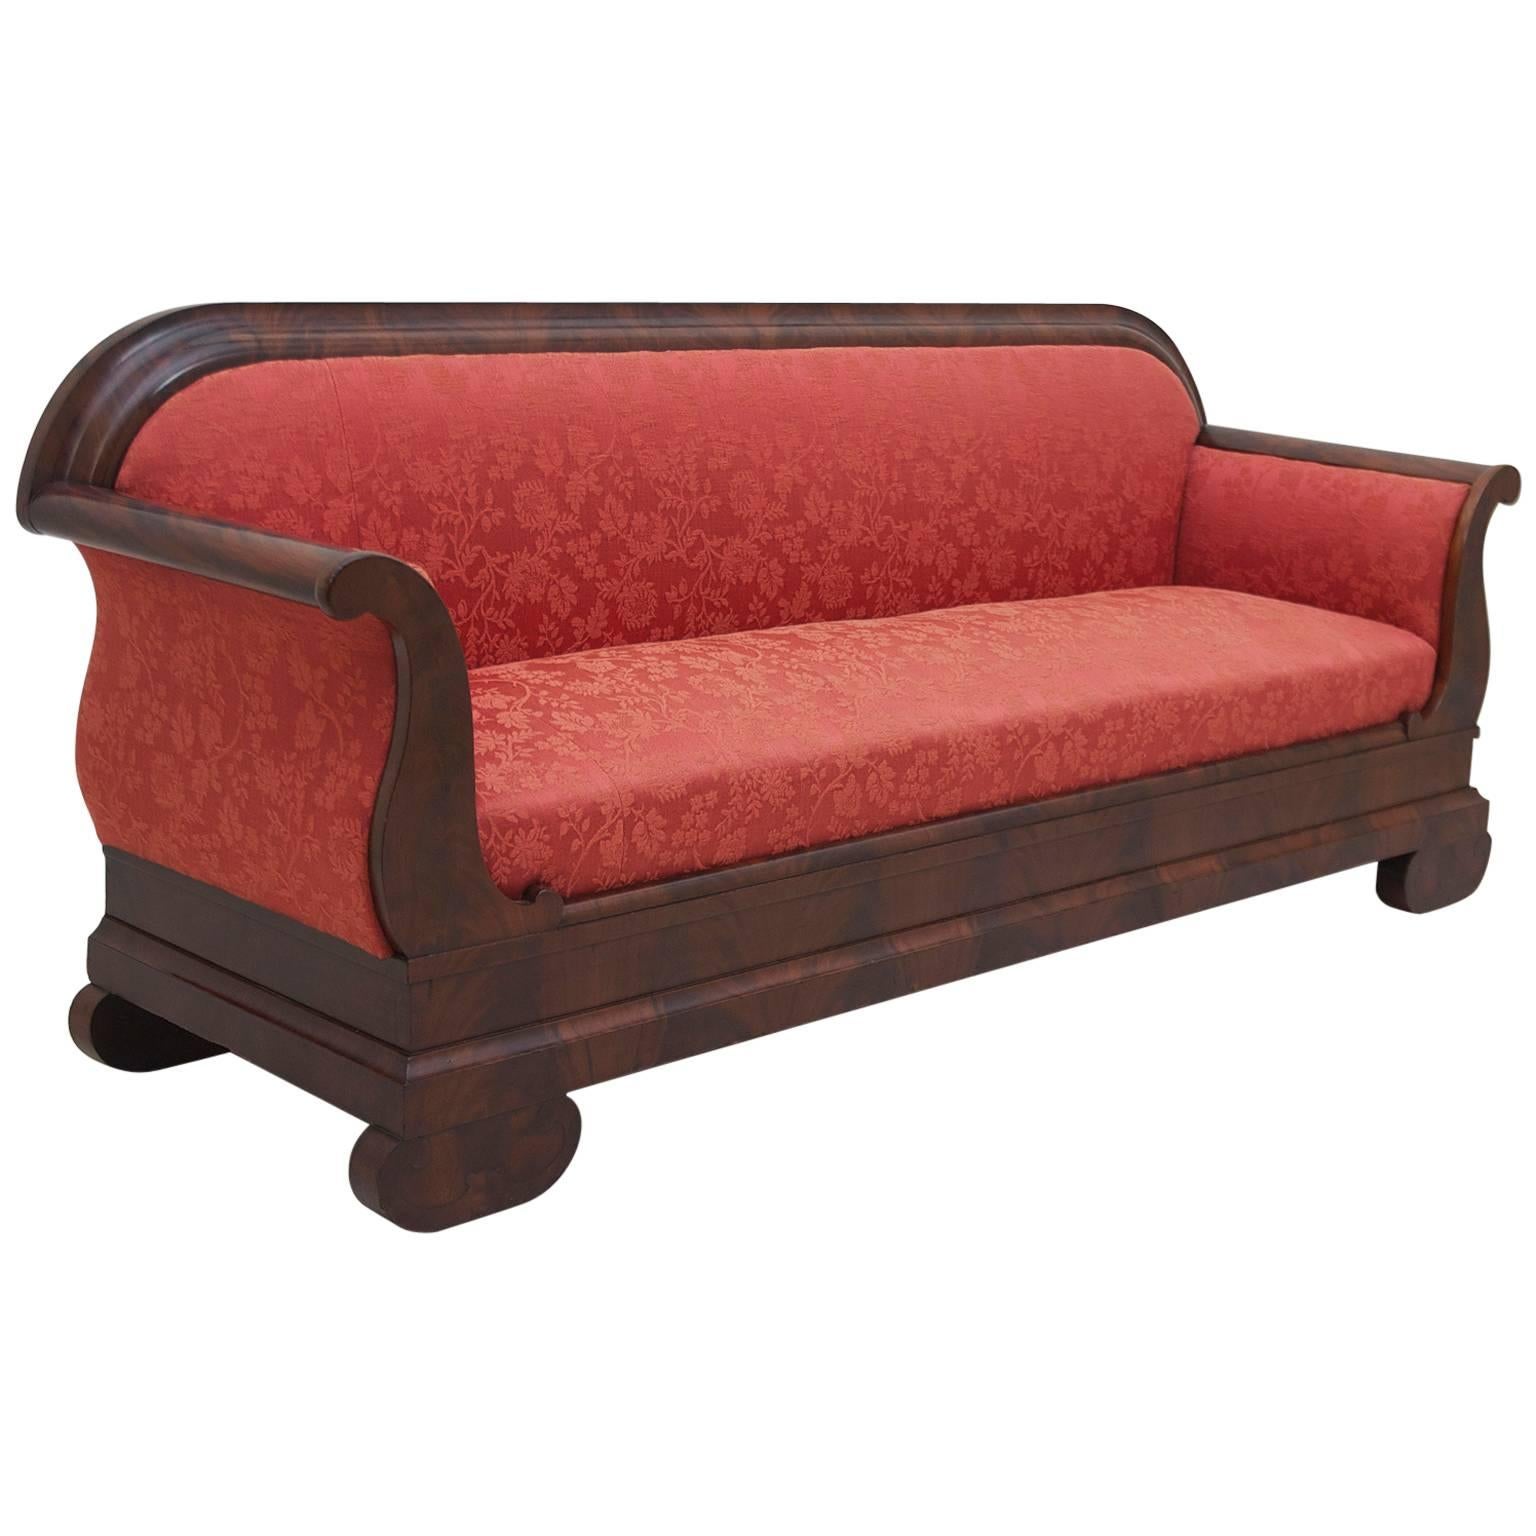 American Empire Sleigh Sofa in Mahogany Attributable to Meeks, circa 1835 For Sale